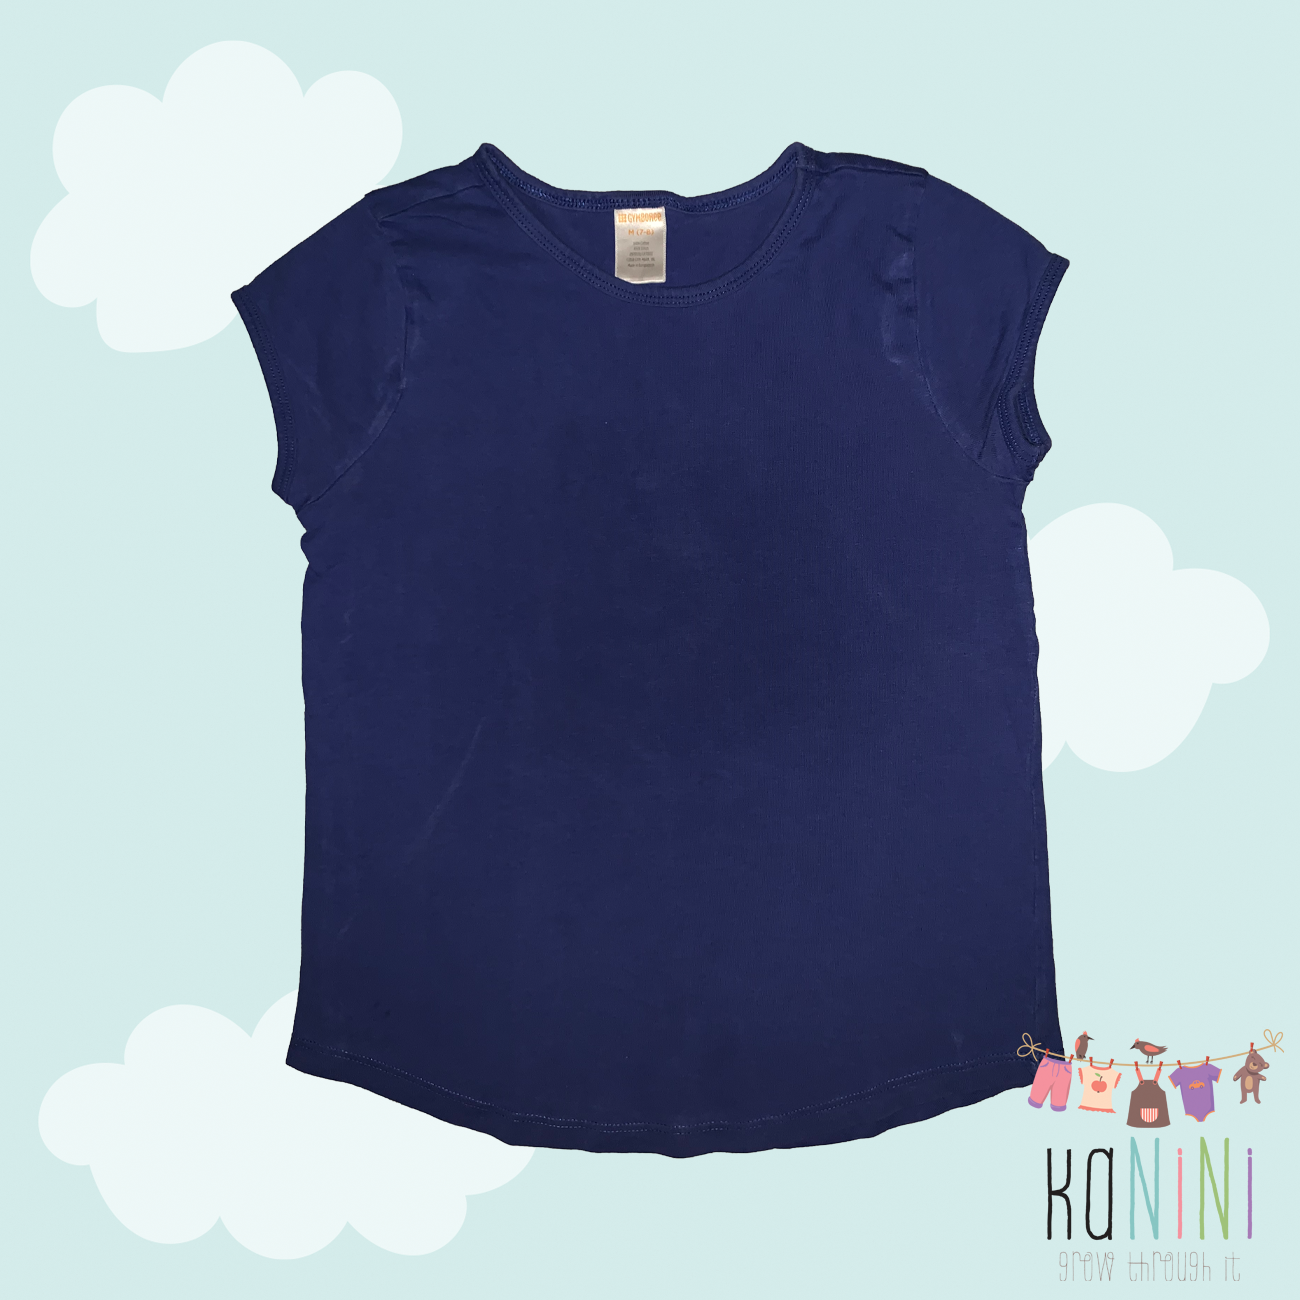 Featured image for “Gymboree 7 - 8 Years Boys Blue T-Shirt”